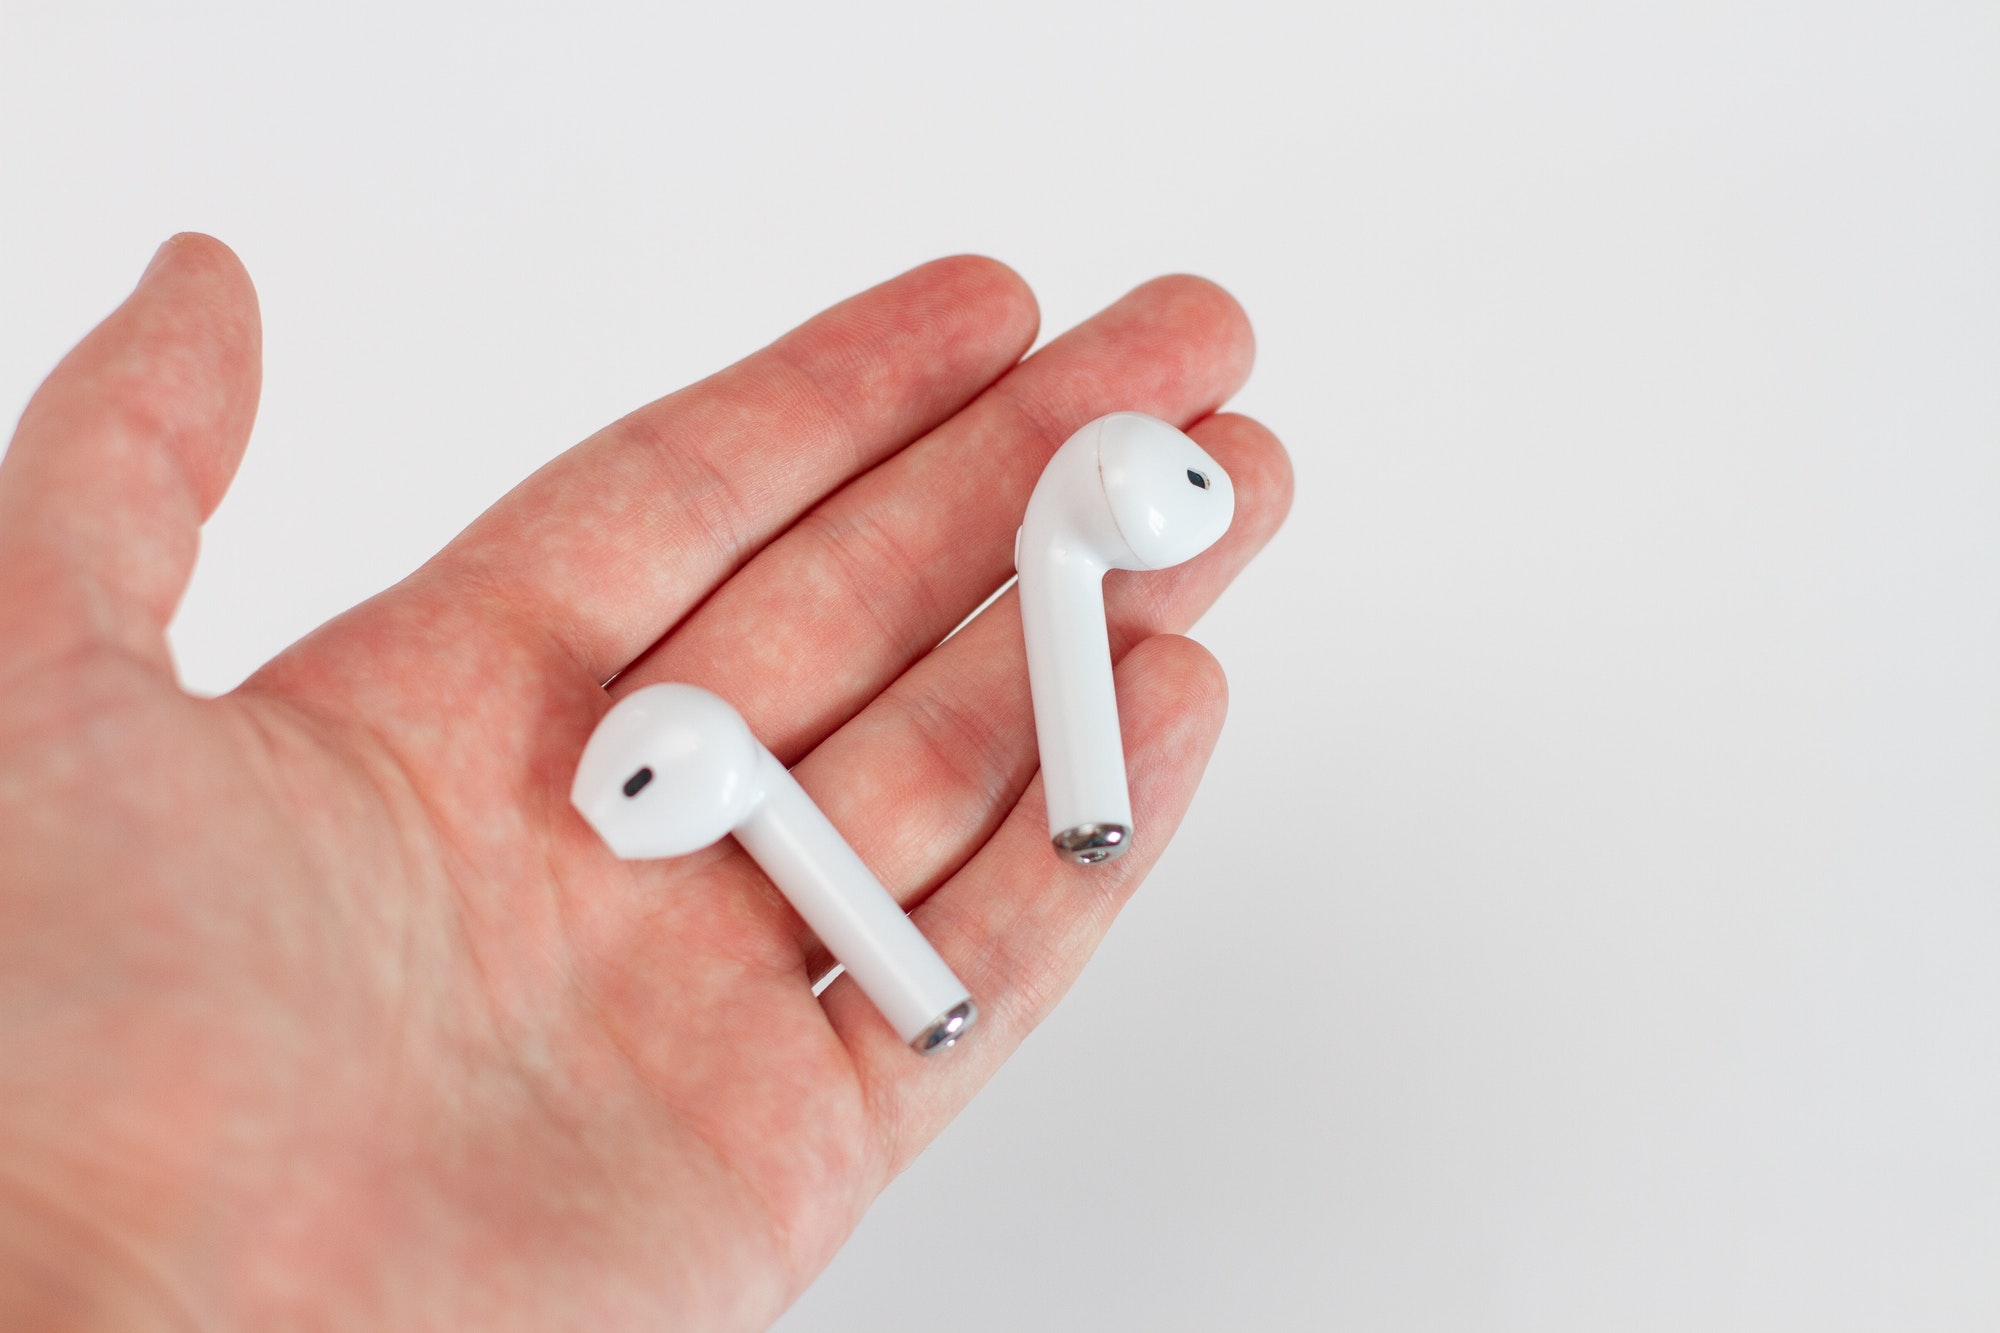 5 Useful Tips For Cleaning Earbuds